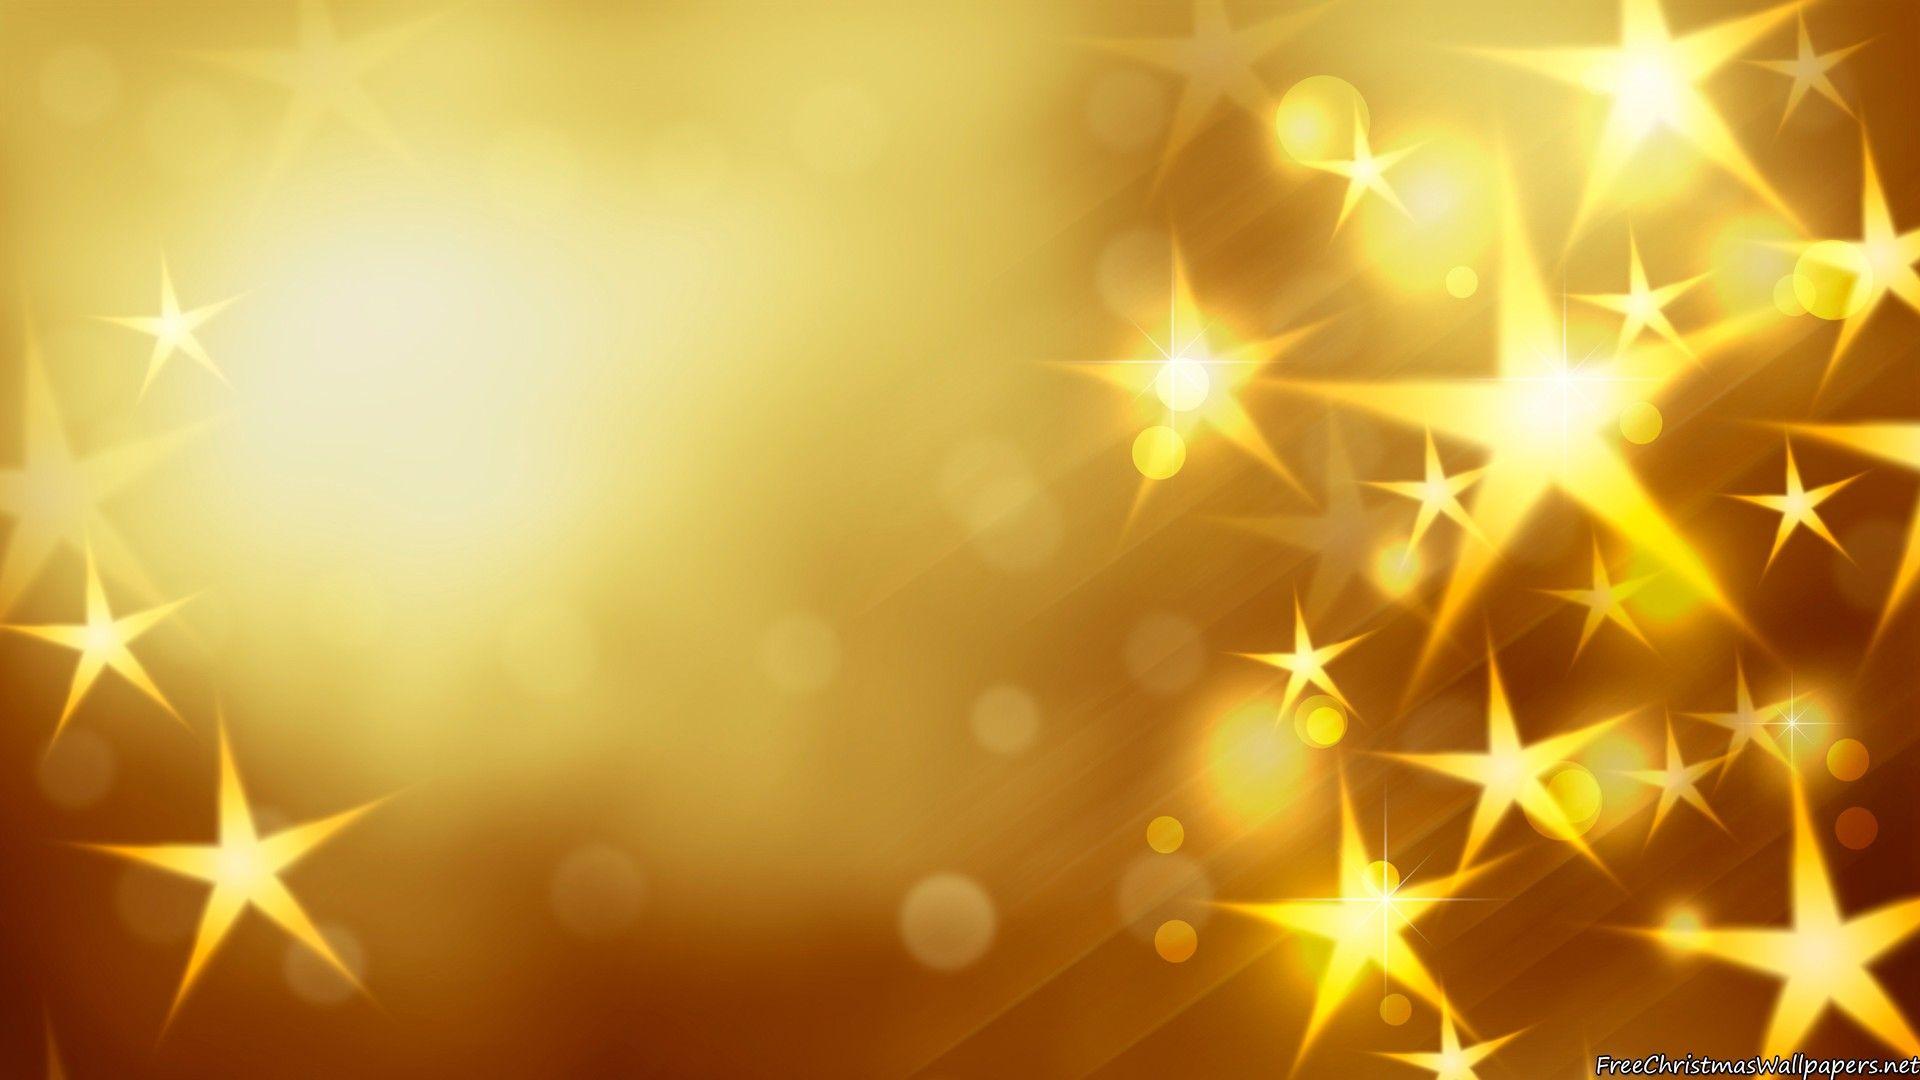 Gold background 23 HD Wallpaper Free